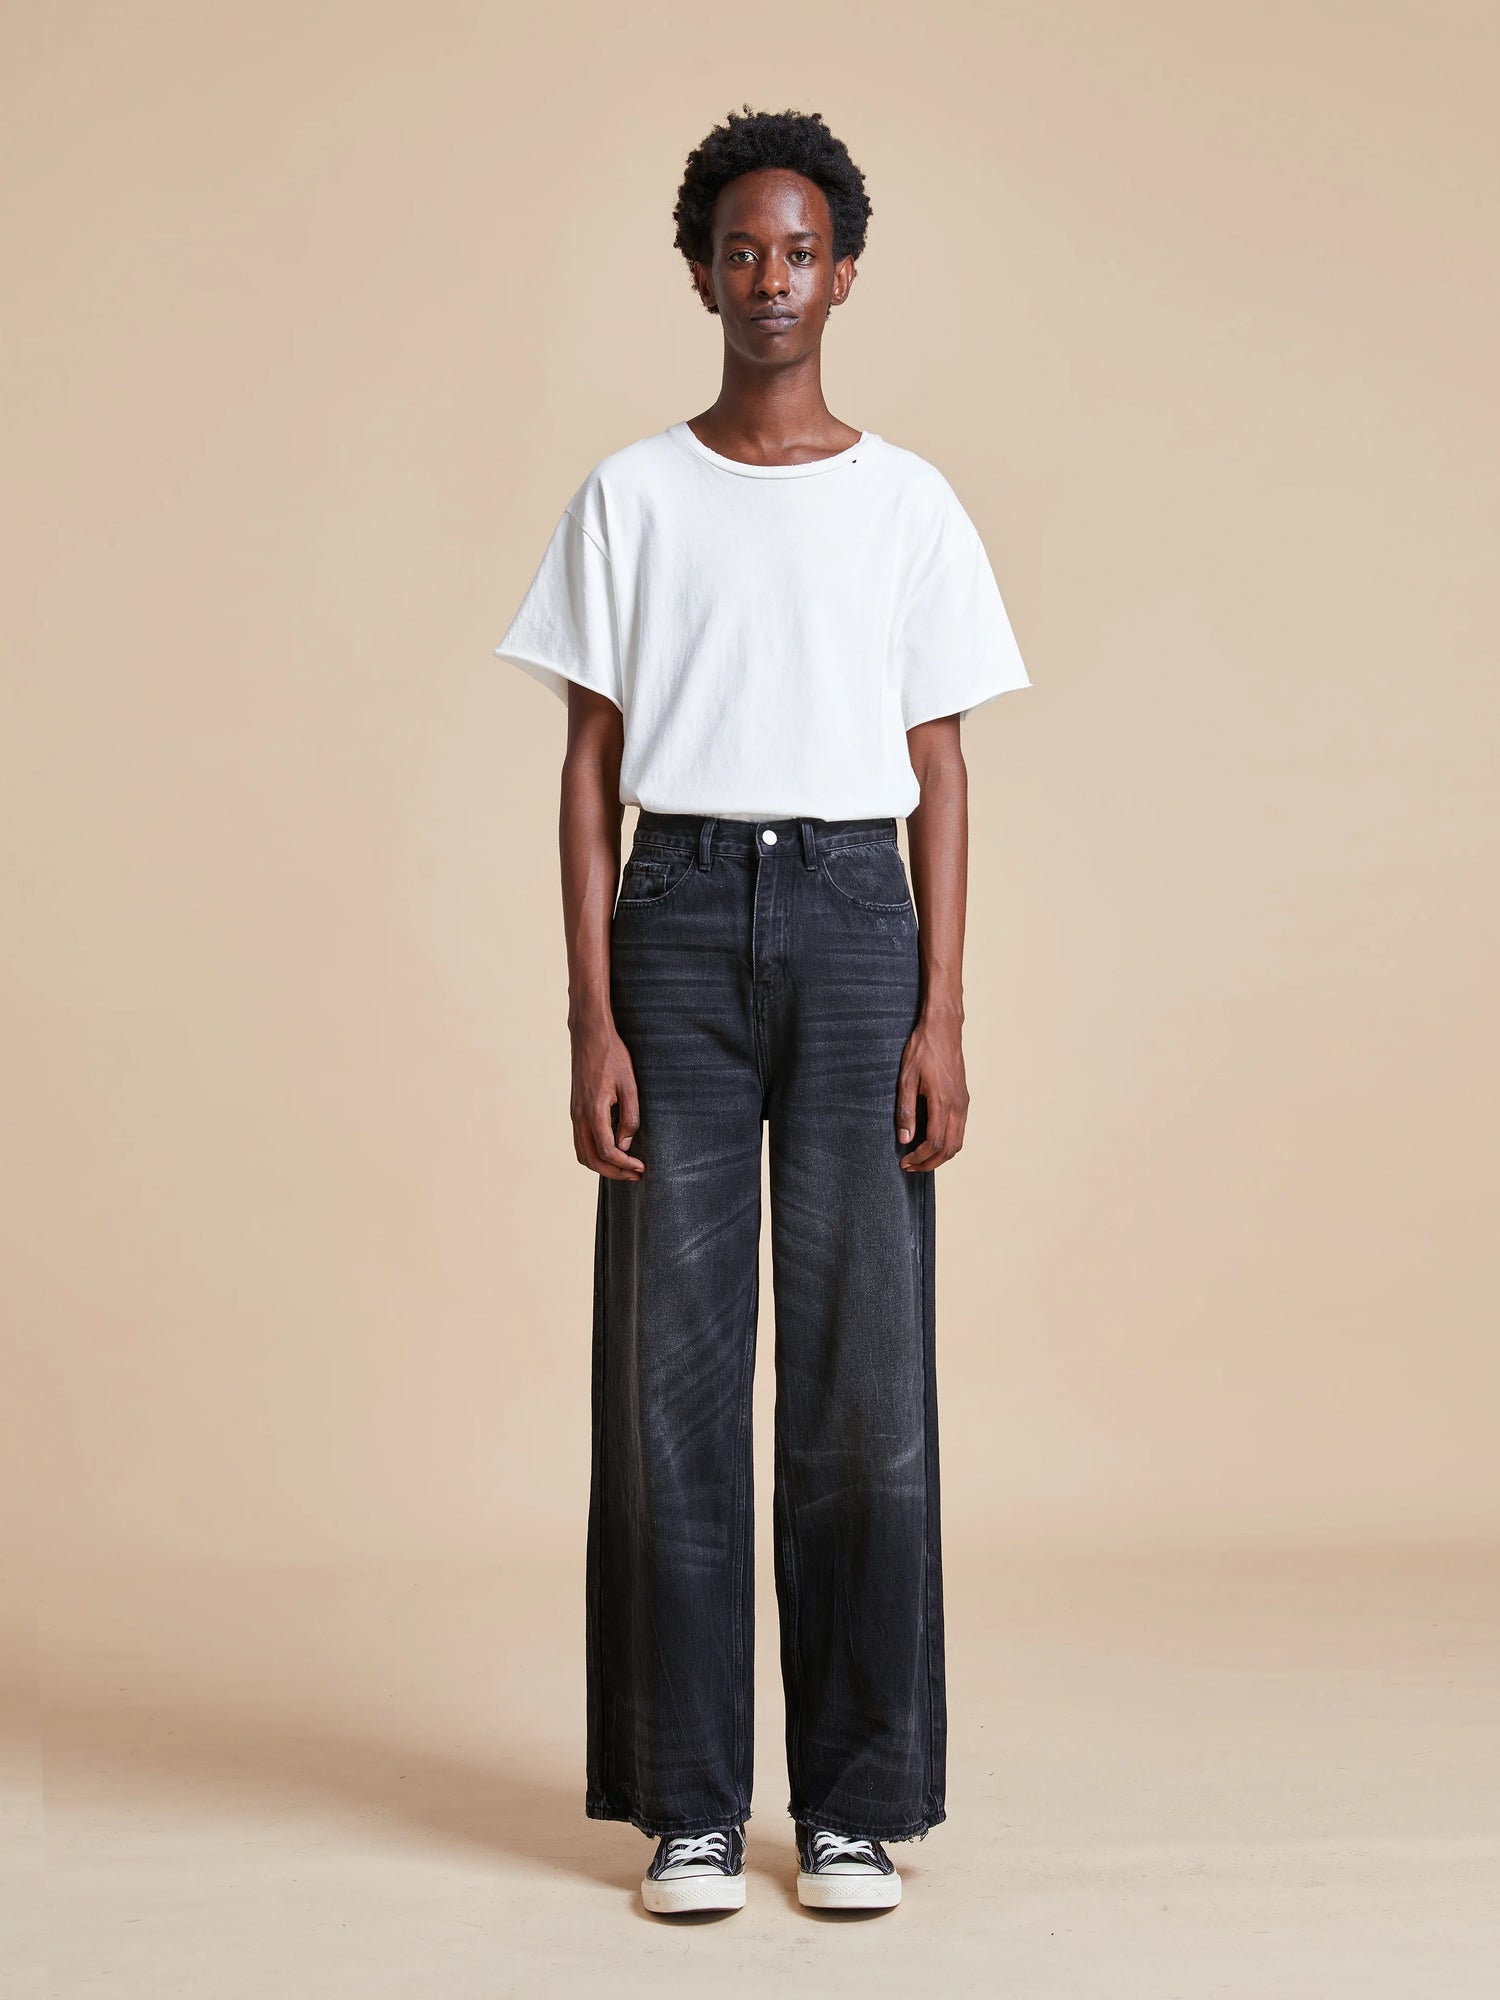 A model wearing Found's Lacy Baggy Jeans with distressed hems and a white t-shirt.